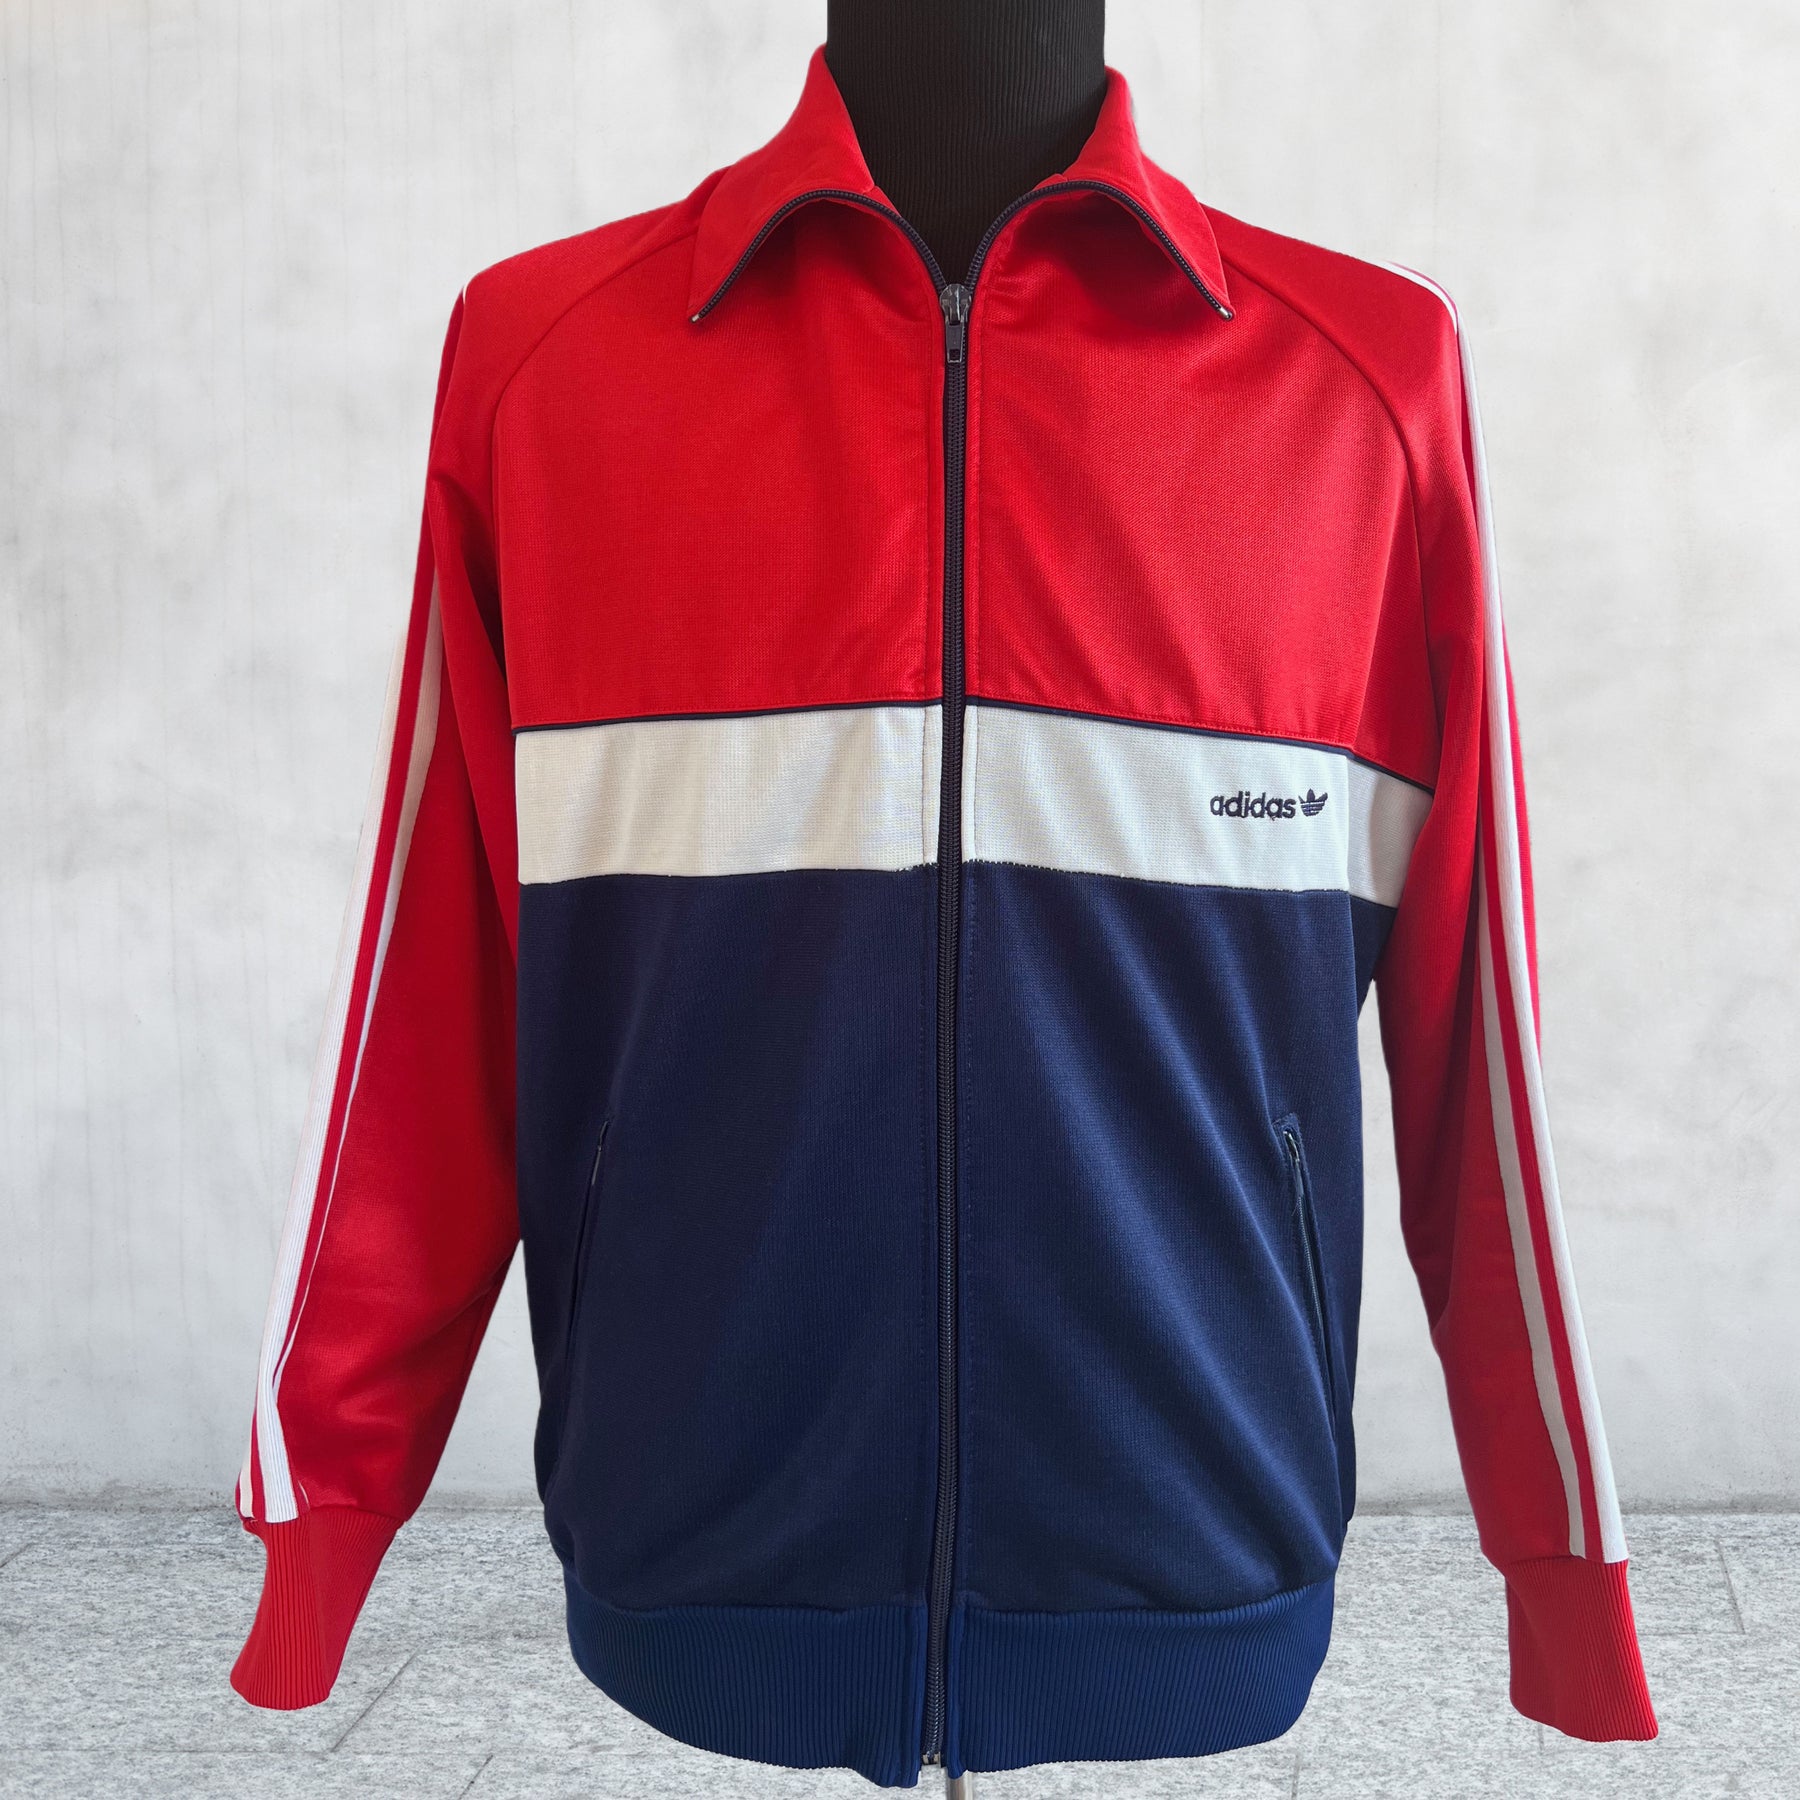 Vintage 80's 90's Adidas Track Jacket. Red, Blue and white stripe